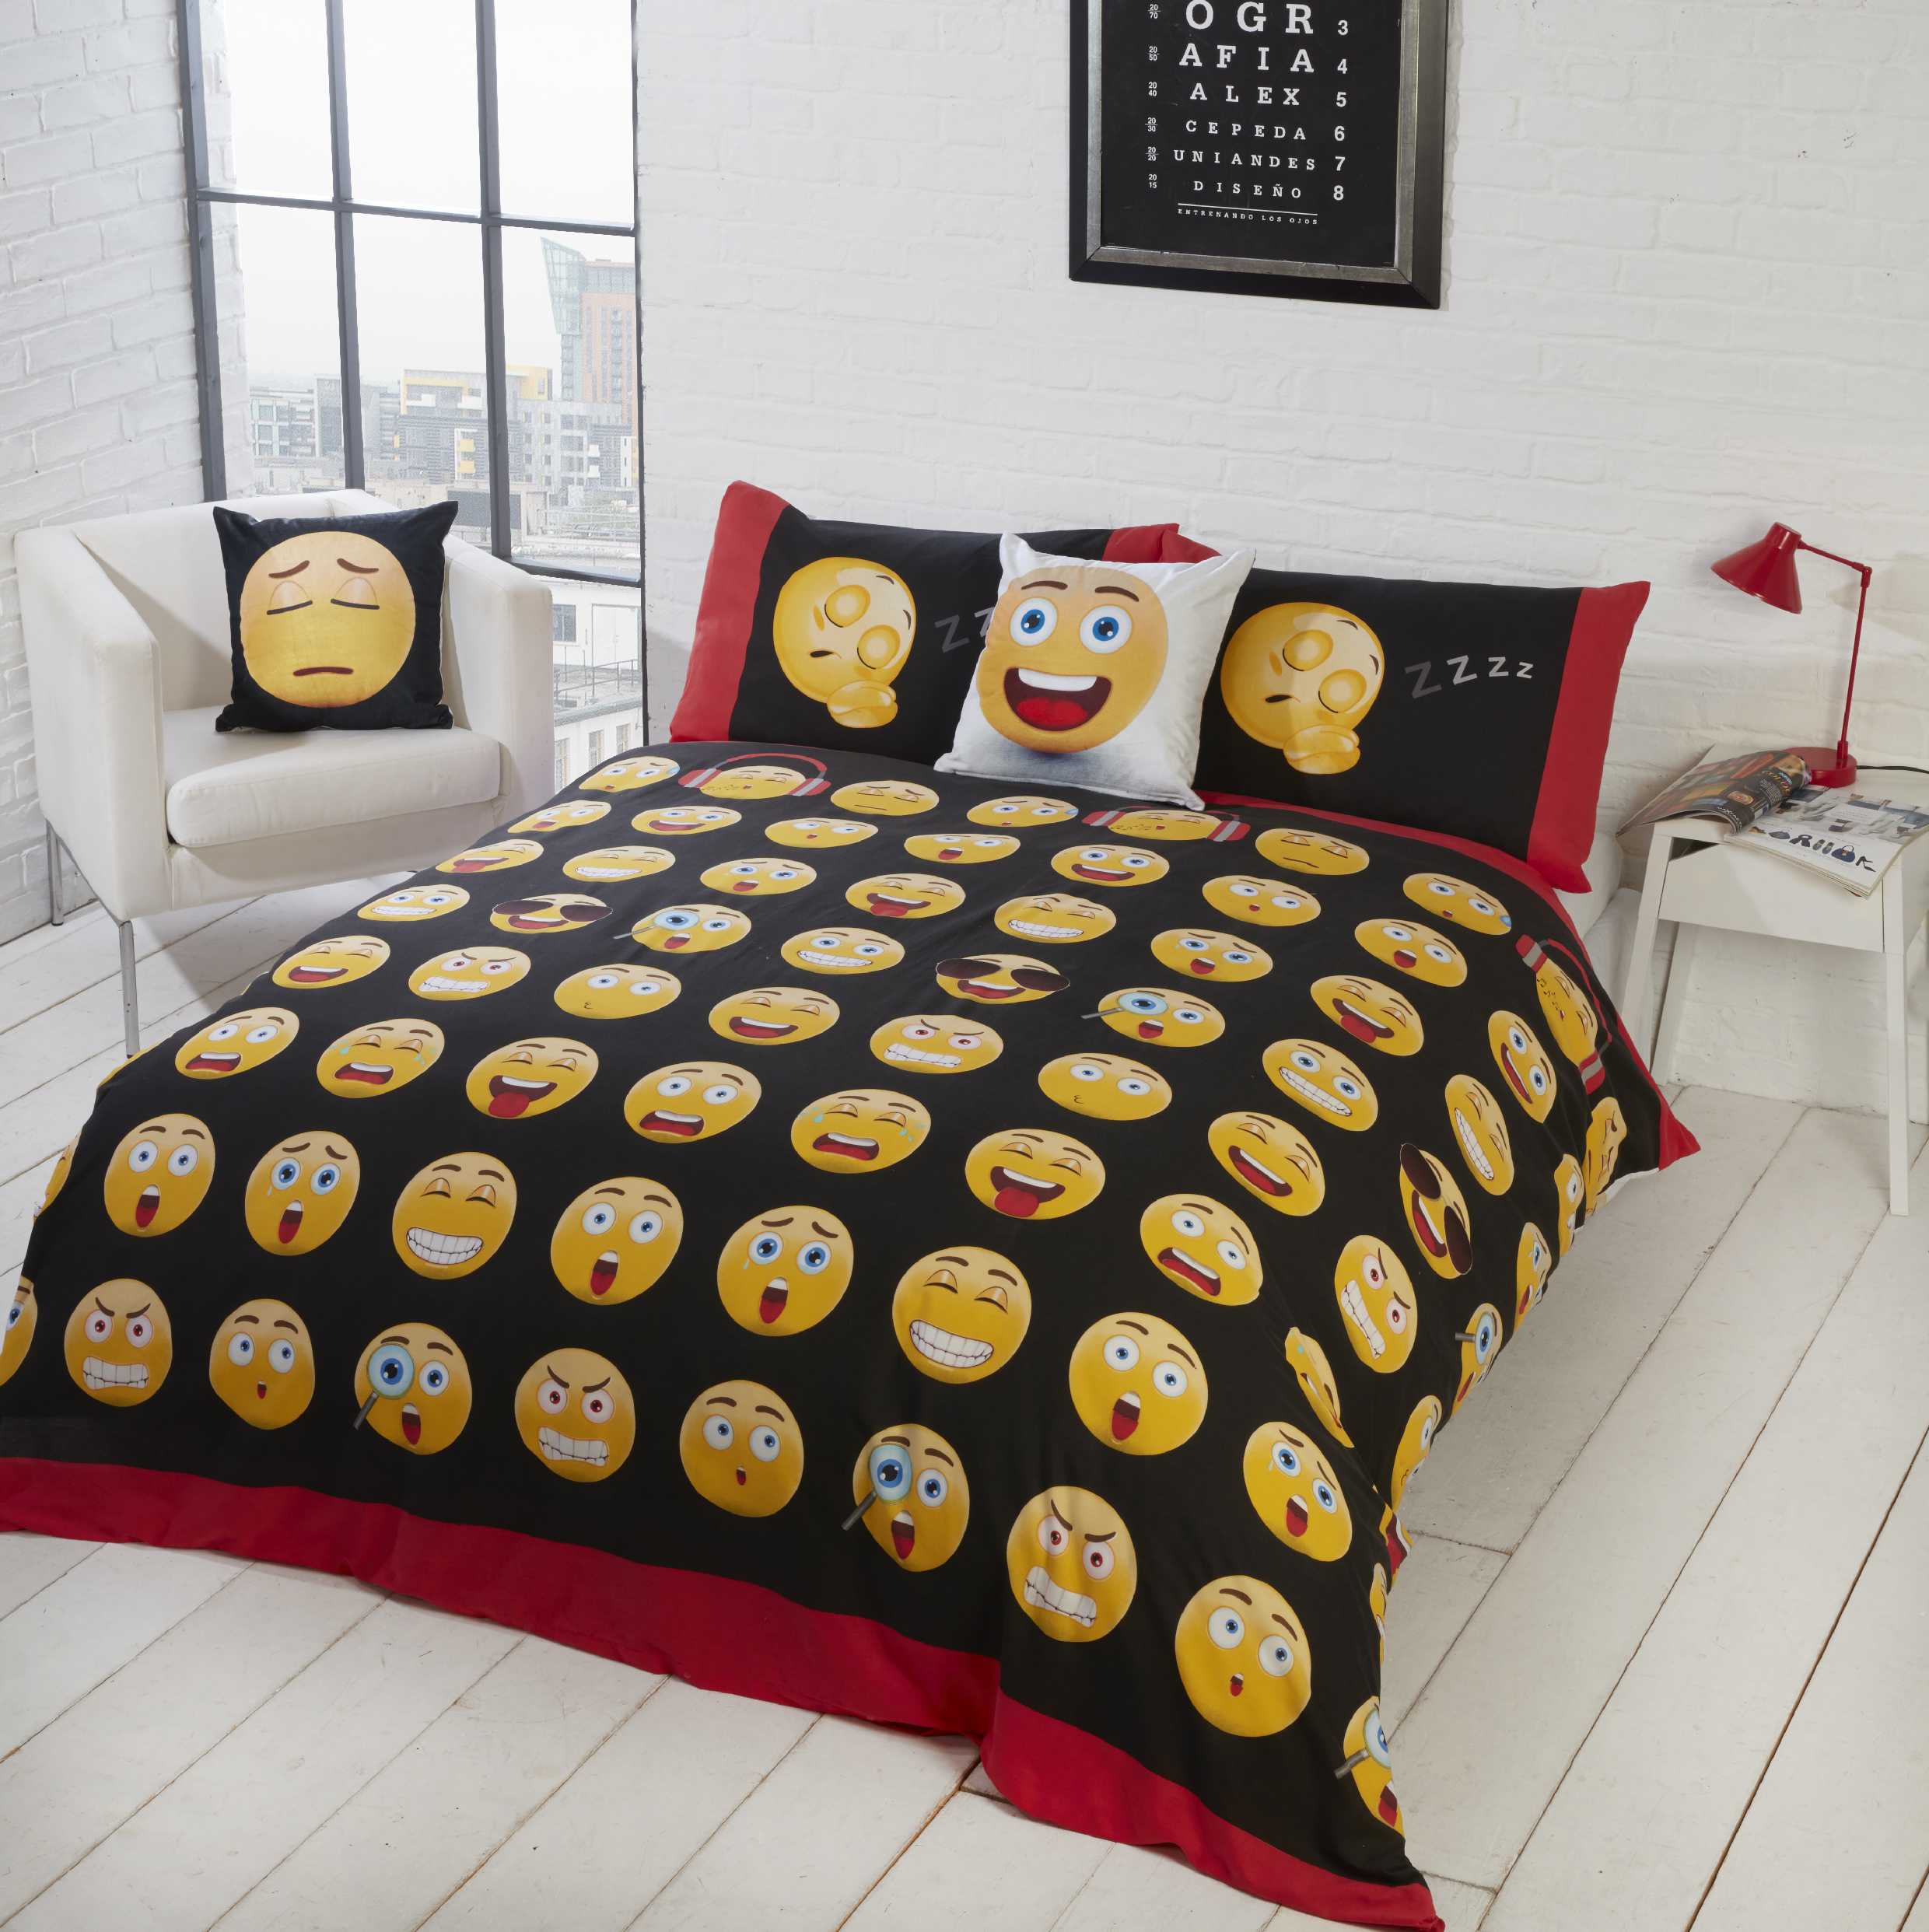 Emotions Emoticons 'Icons' Multi Reversible Rotary King Bed Duvet Quilt Cover Set